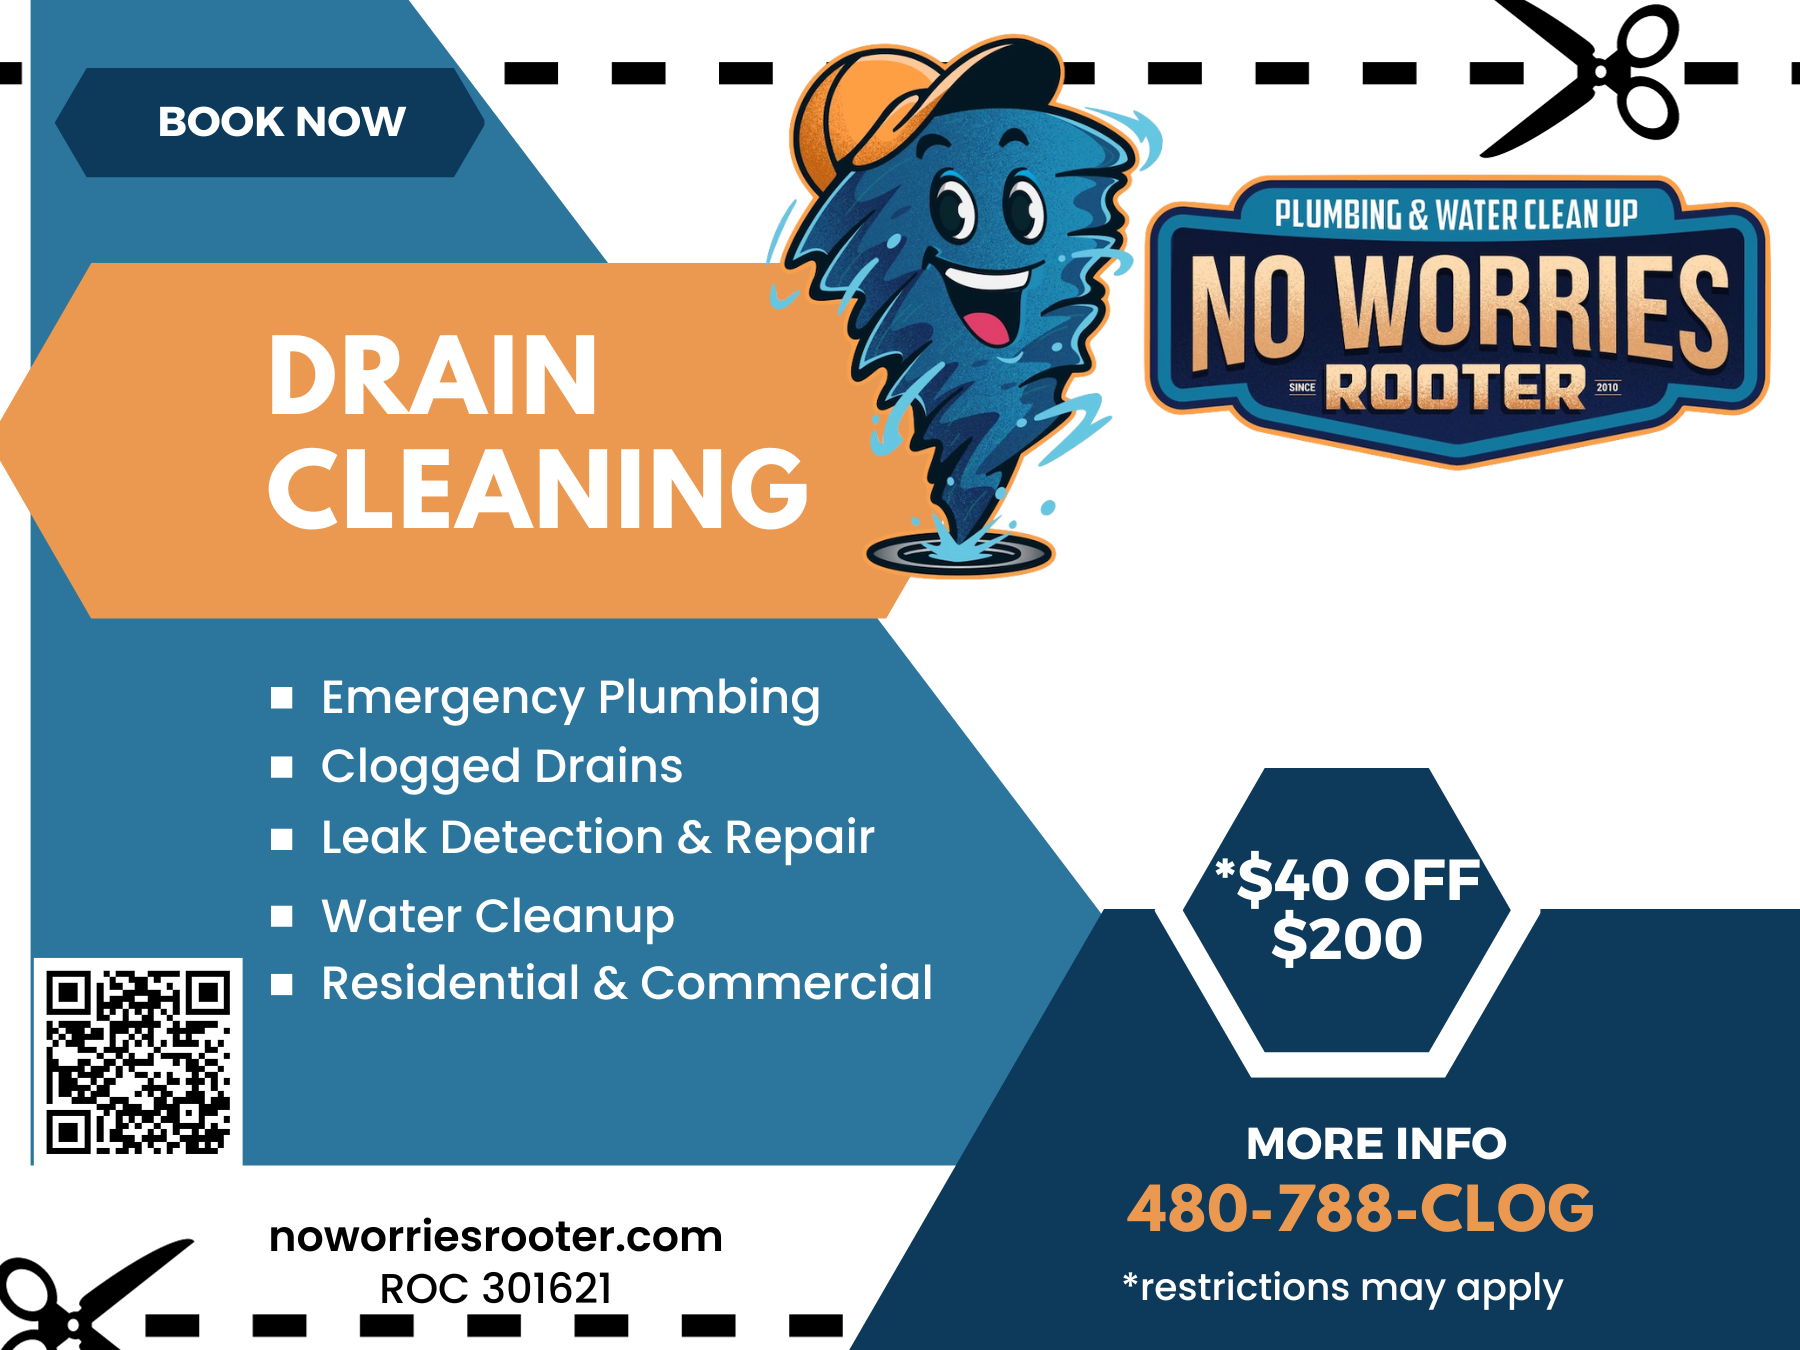 Plumbing & Drain Cleaning Services, Top Tier